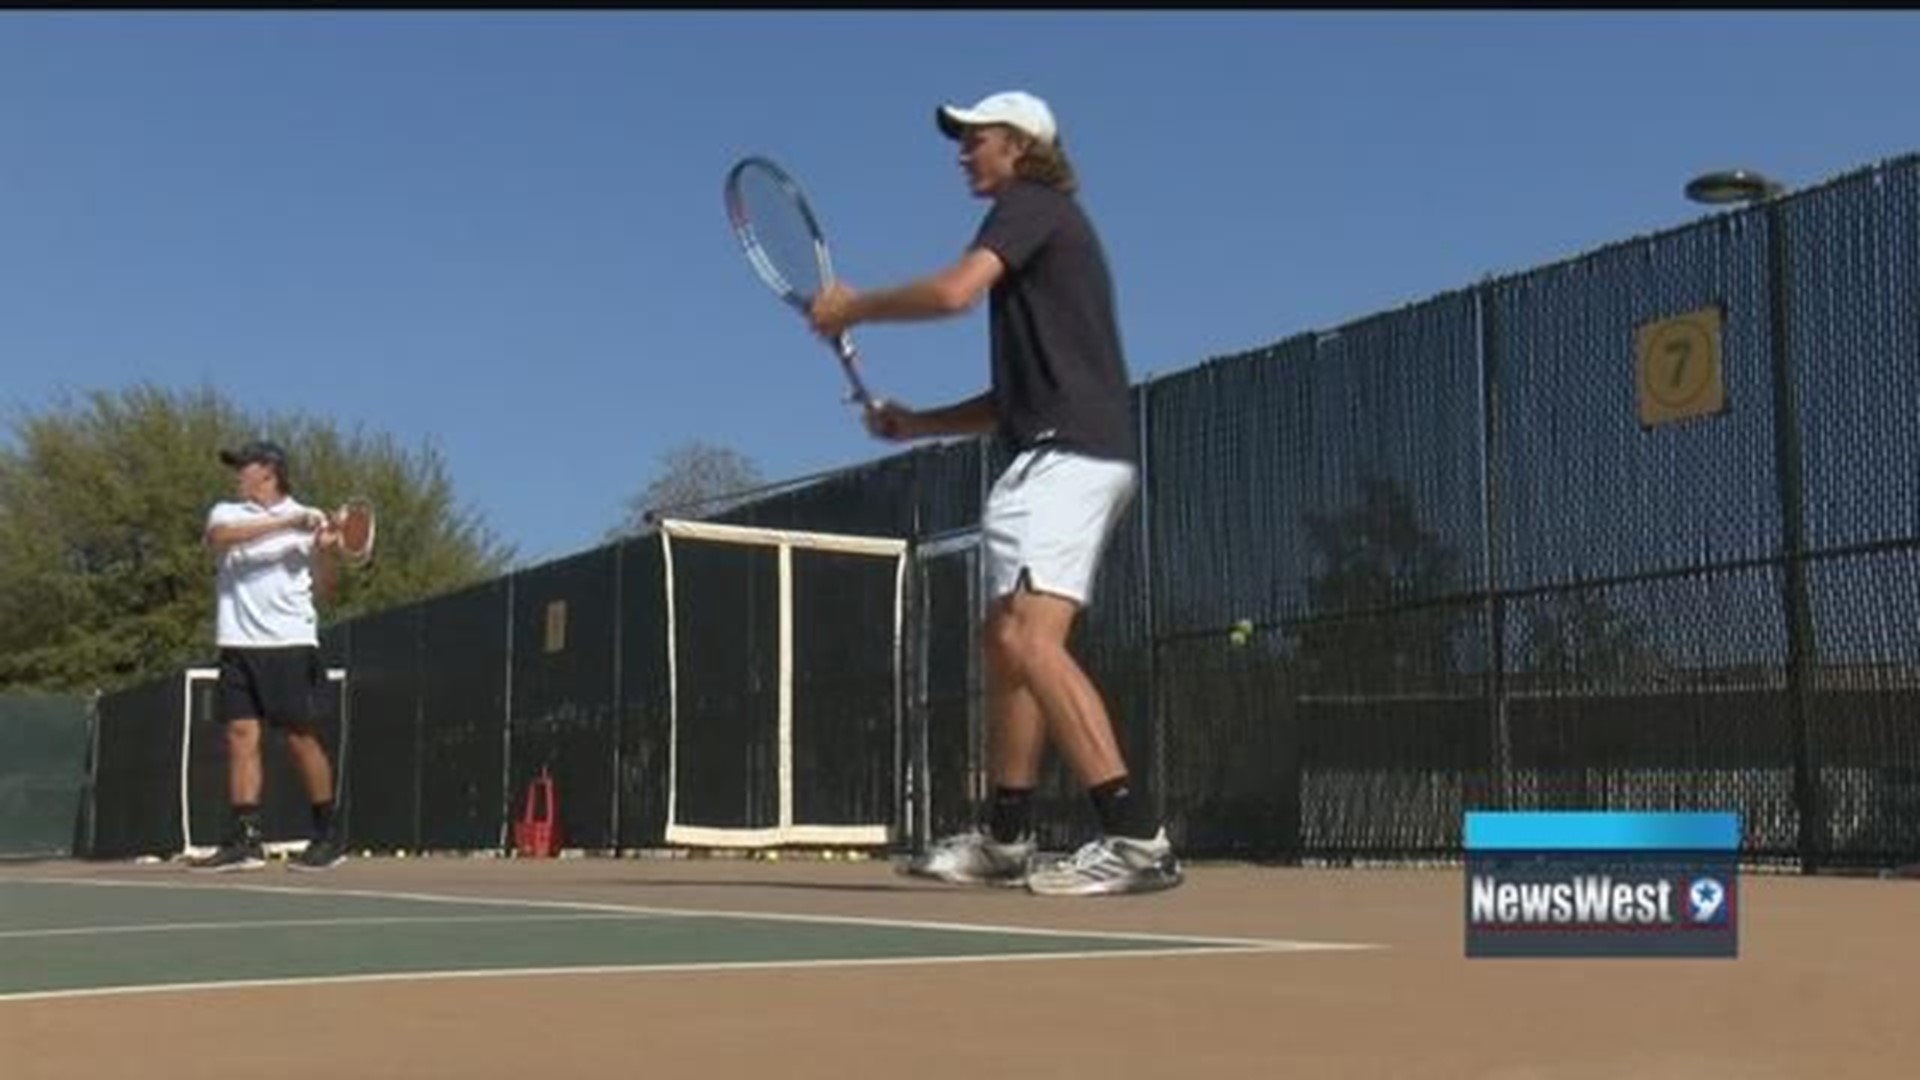 Midland Christian boys tennis doubles gets ready for state